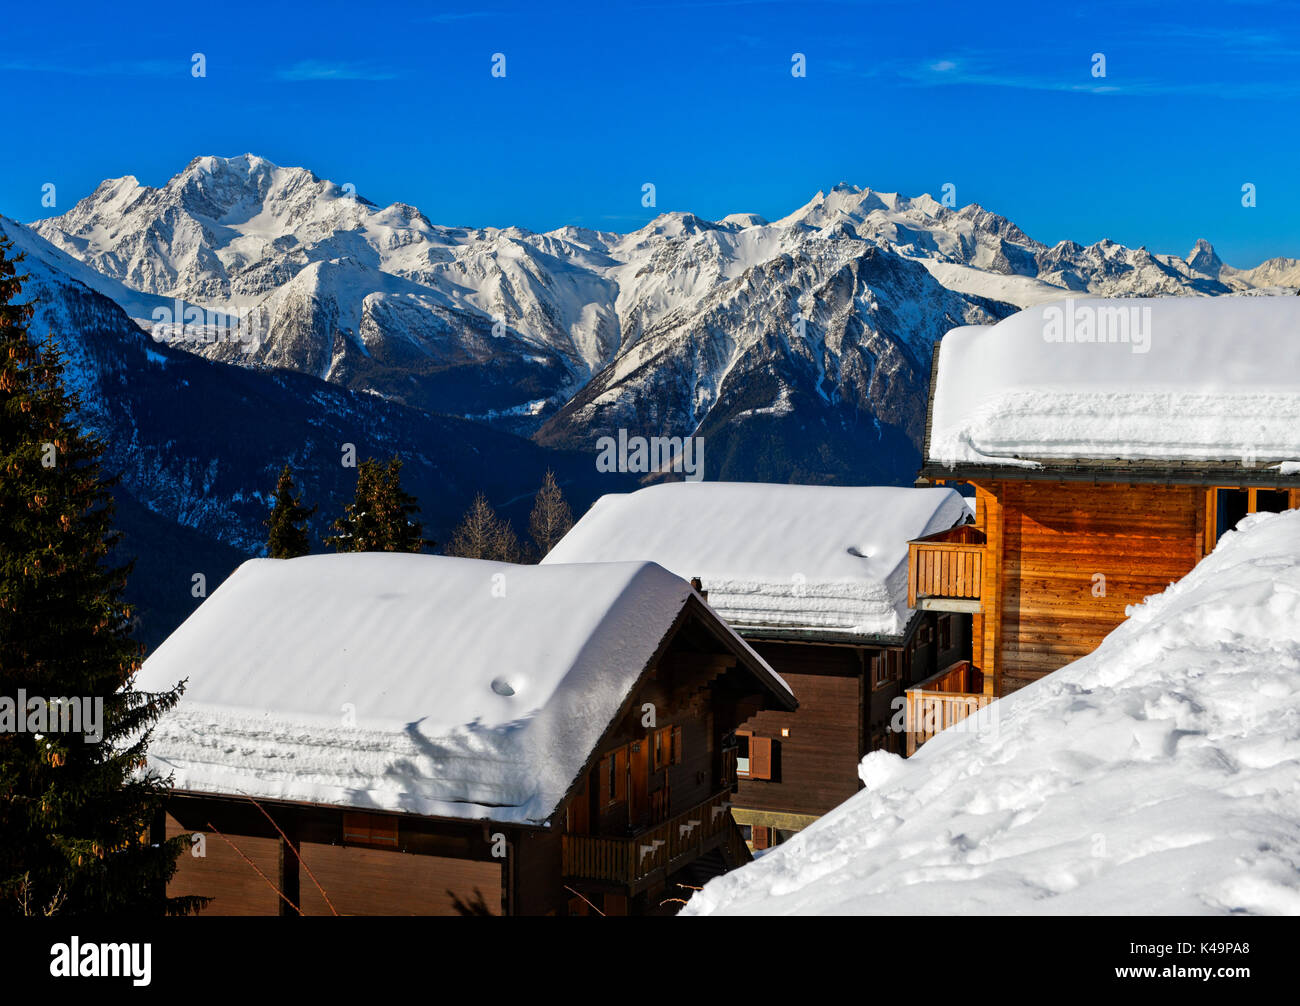 Swiss Chalets With Thick Snow Cover On The Roof In The Swiss Alps, Bettmeralp, Valais, Switzerland Stock Photo